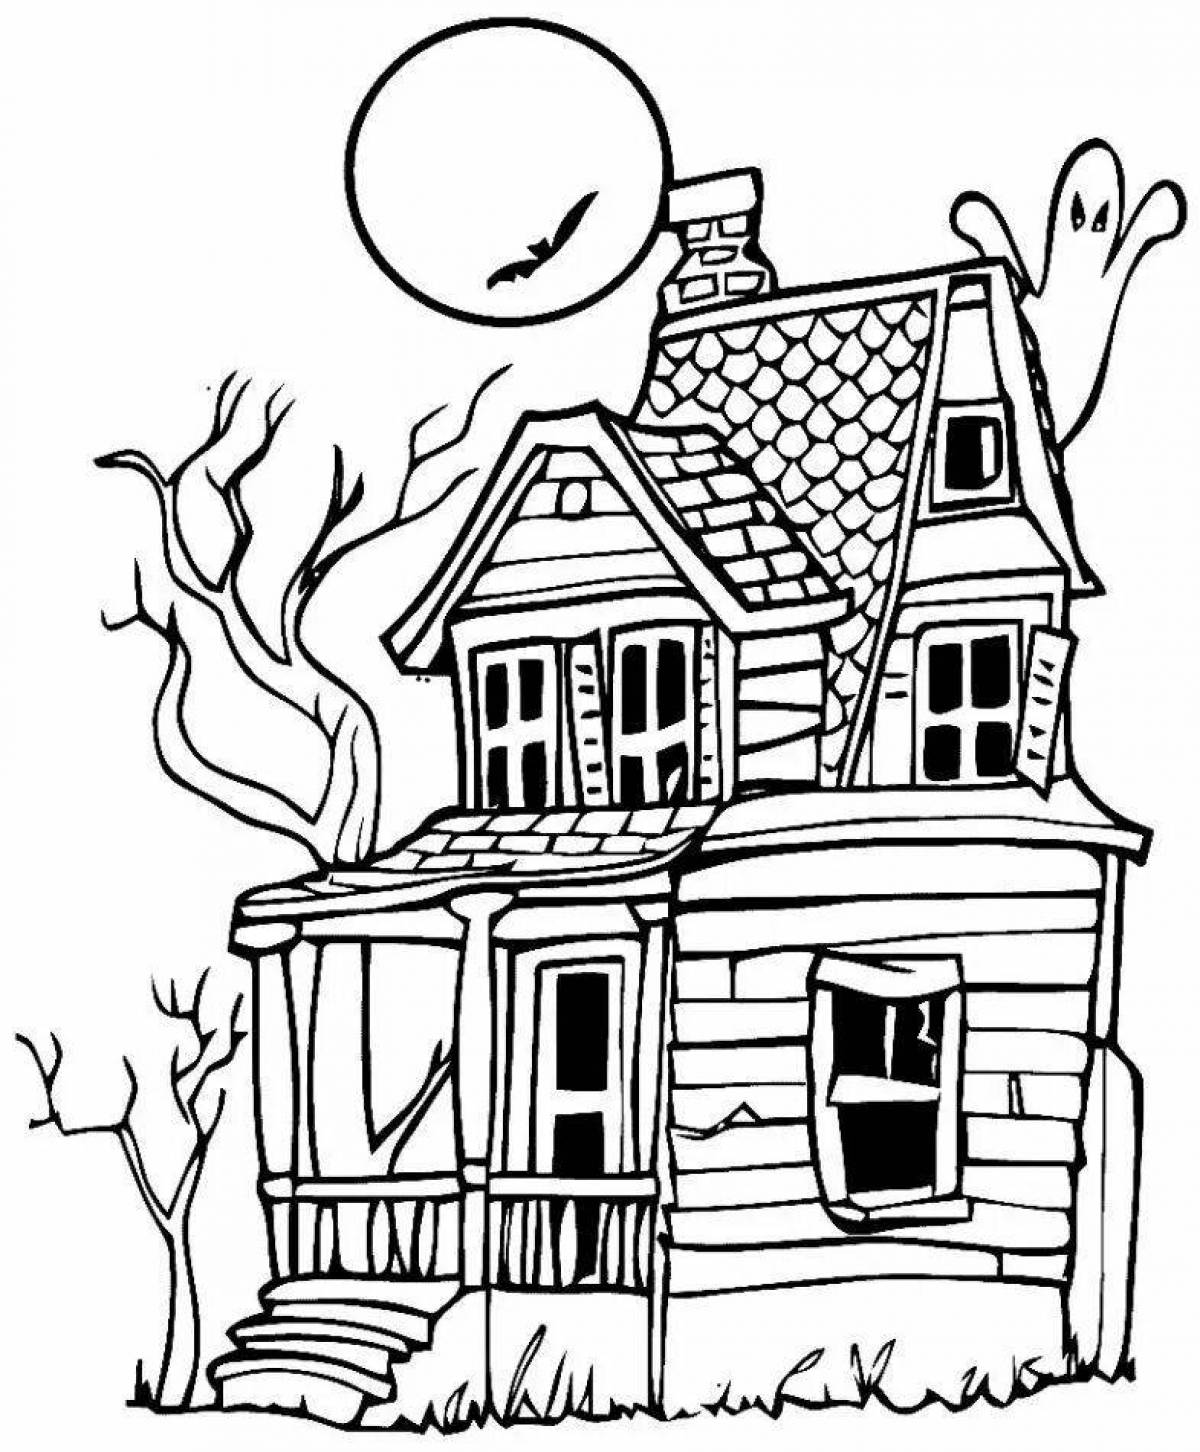 Greeting hello neighbor house coloring page